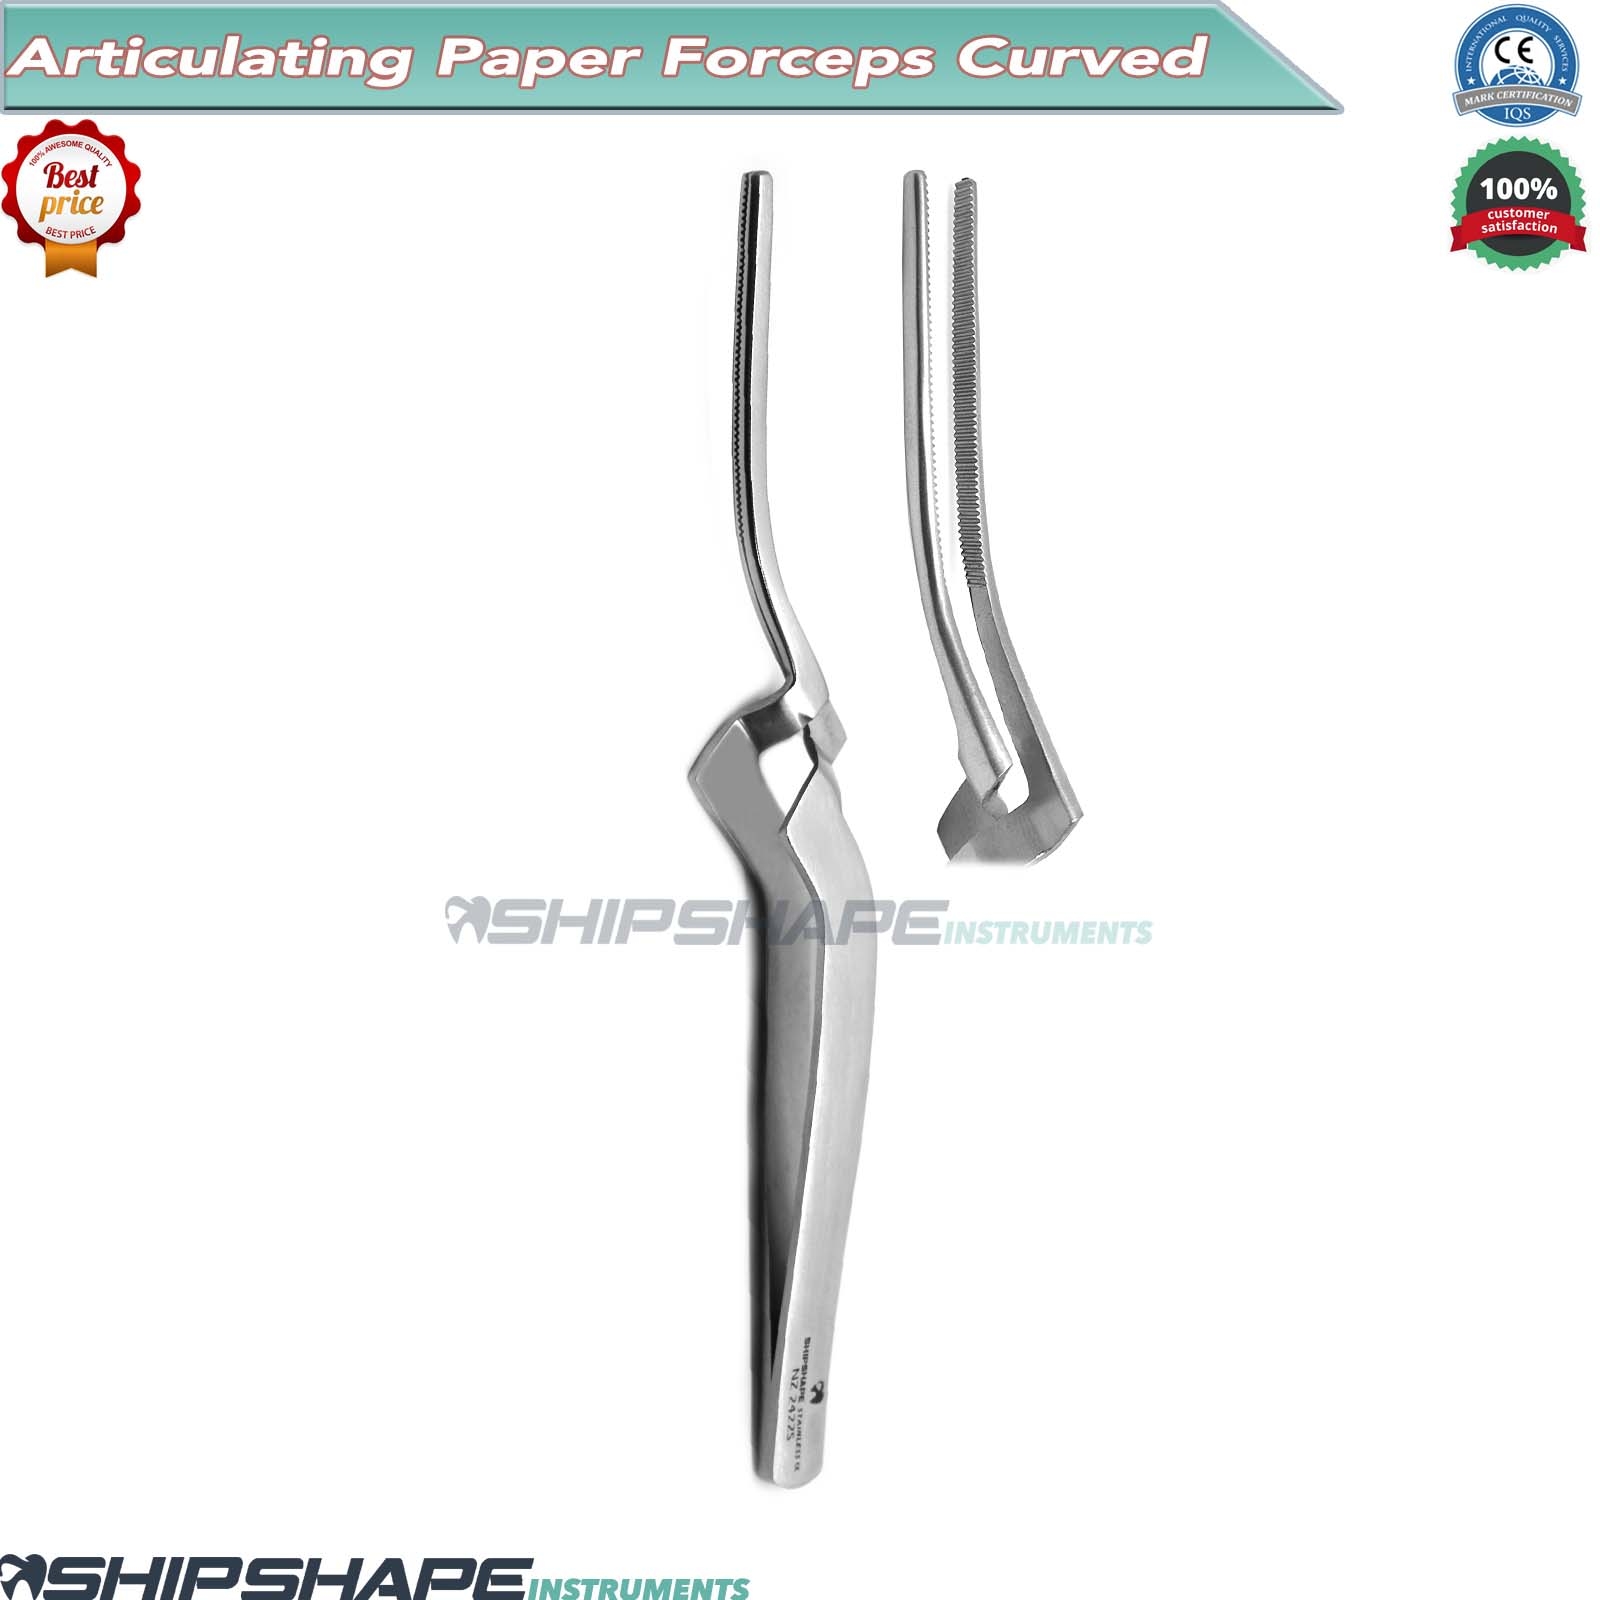 Articulating Paper Forceps Curved 6" Dental Surgical UPGRADED Instruments-0